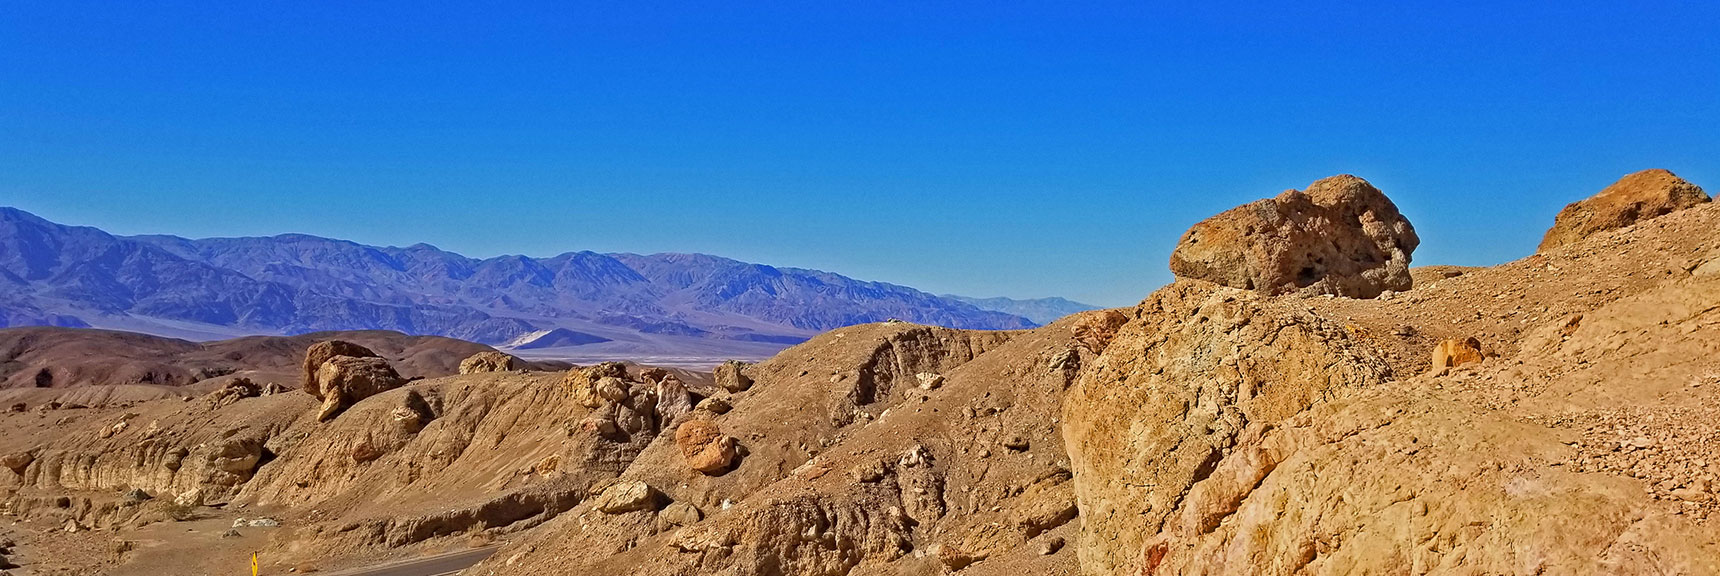 Northwestern View of Death Valley and Panamint Mountains from Top of Dry Waterfall Bypass | Artists Drive Hidden Canyon Hikes | Death Valley National Park, California